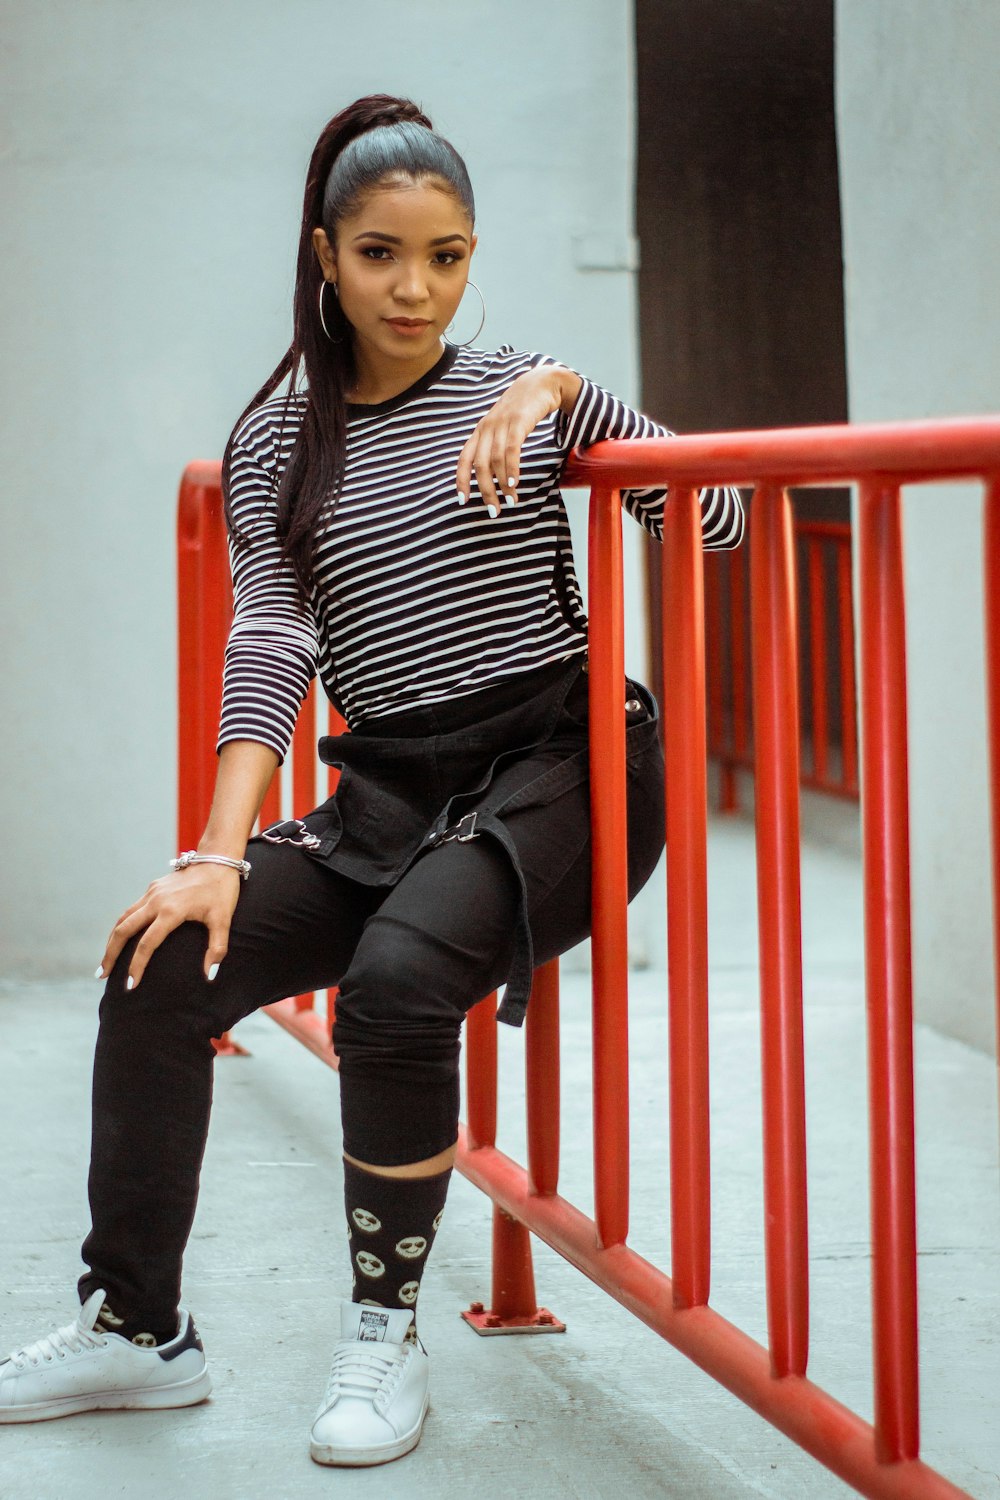 woman in black and white striped long sleeve shirt and black pants sitting on red metal